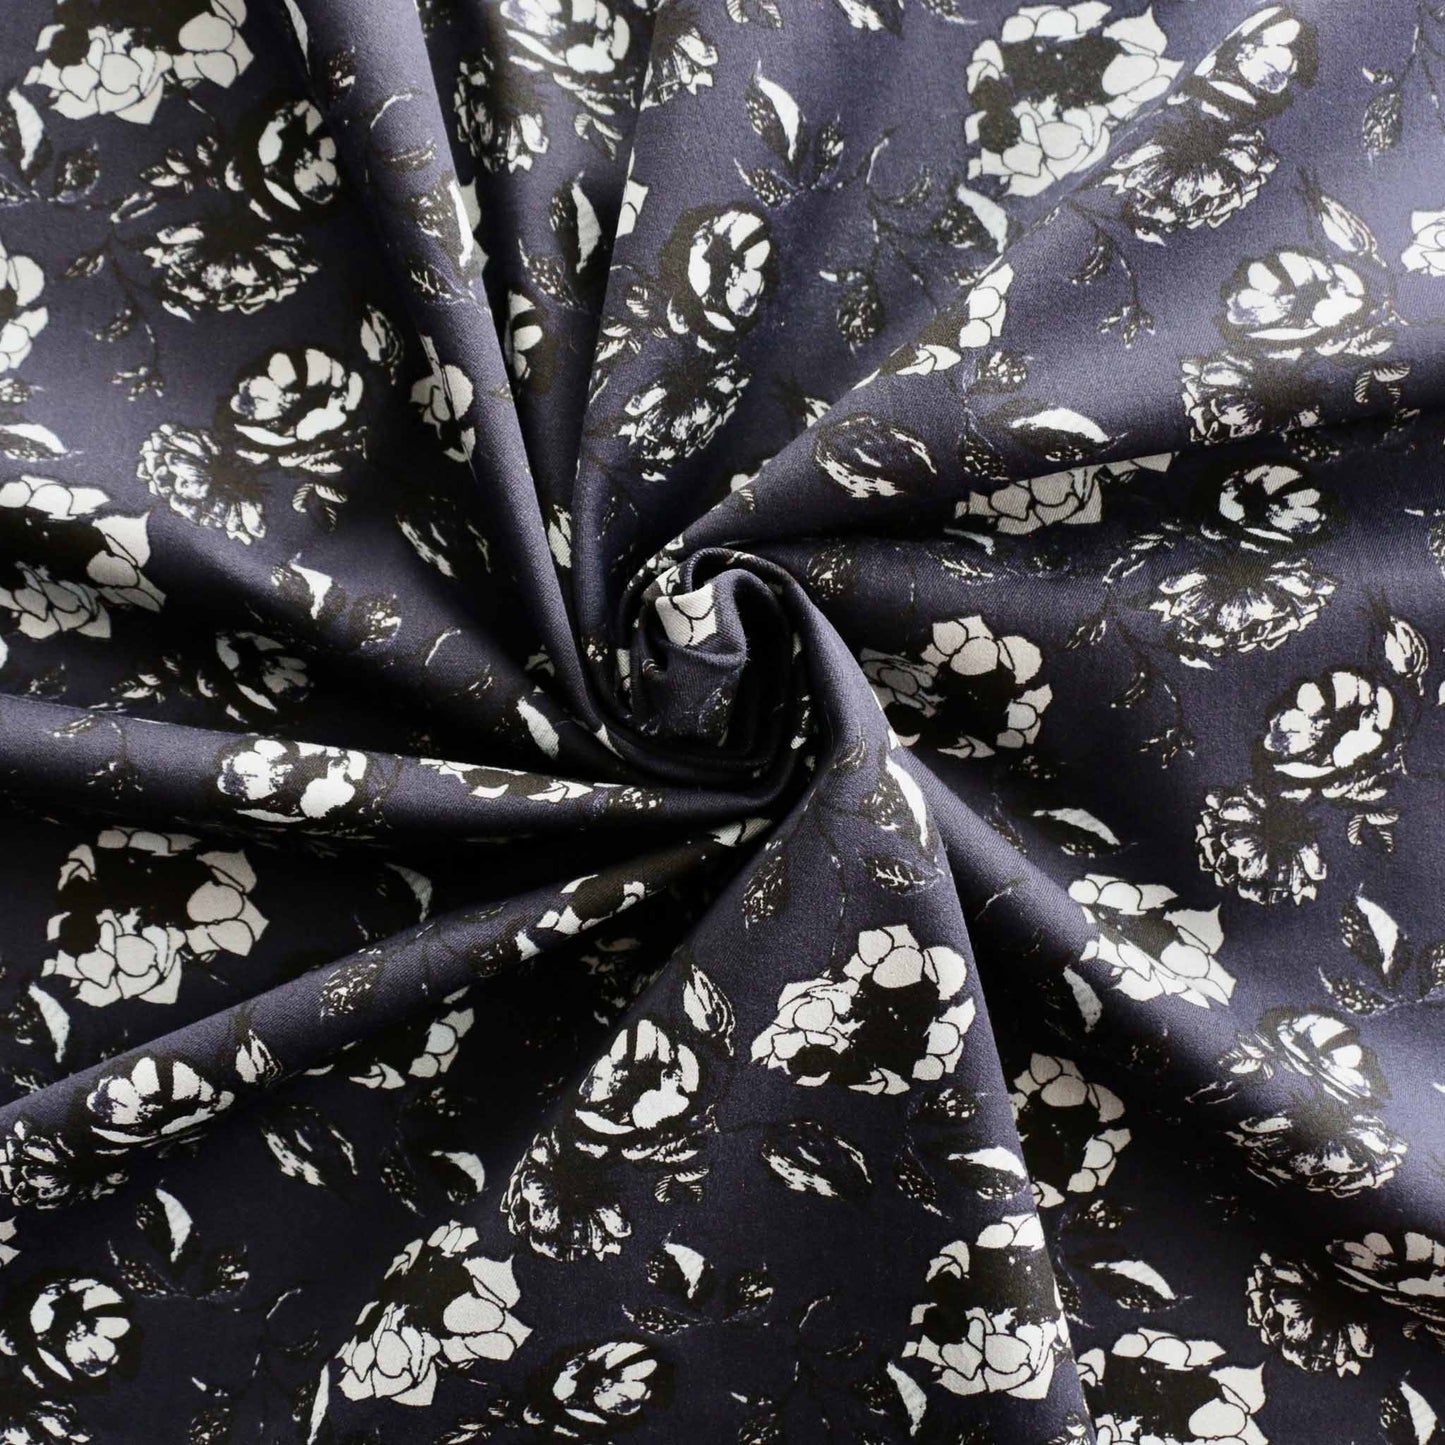 floral printed flowers in white and black on navy blue cotton sateen dressmaking fabric